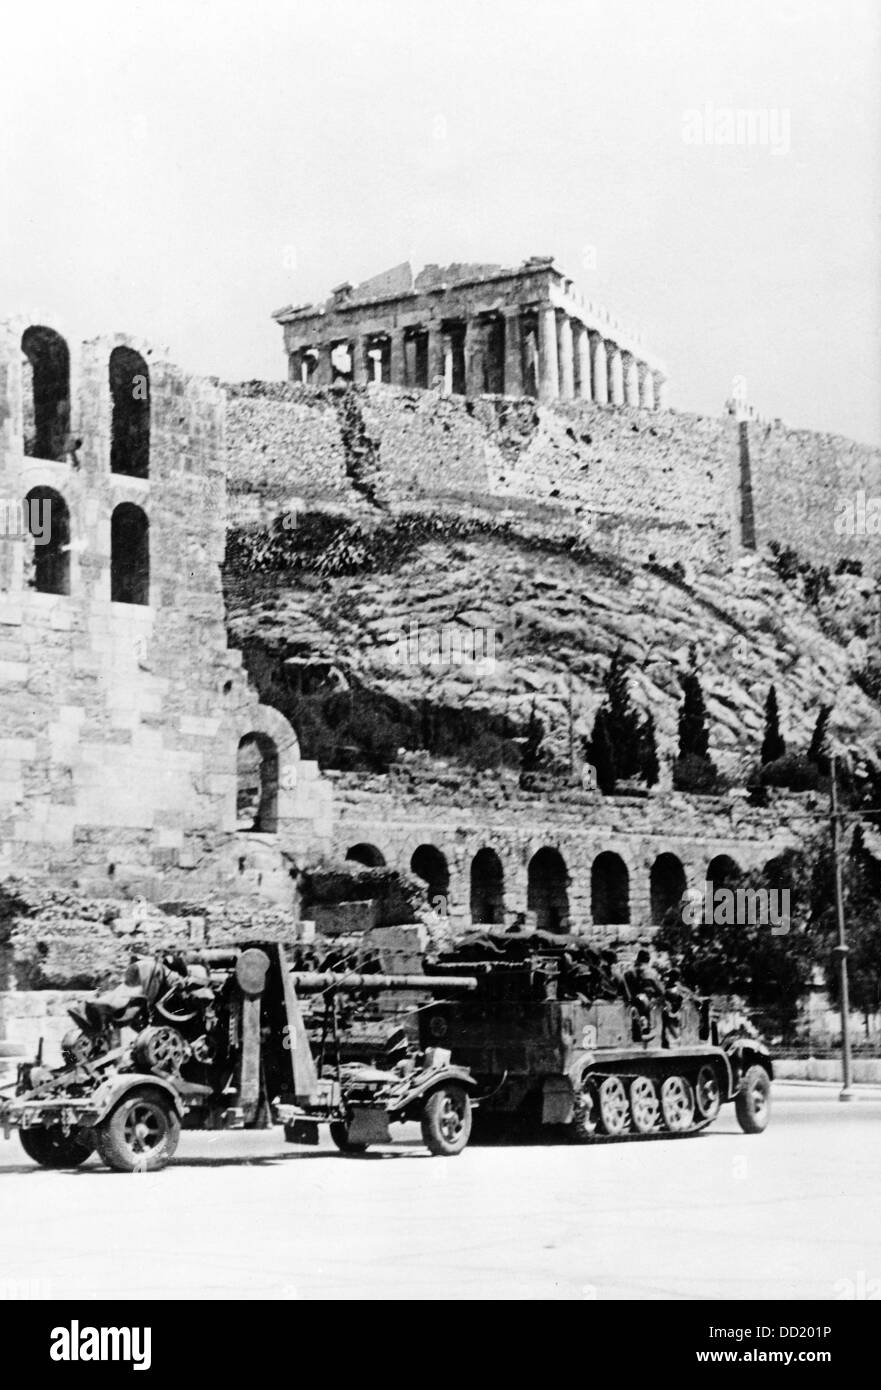 The image from the Nazi Propaganda! shows artillery of the German Wehrmacht in front of the Acropolis in Athens, Greece, in May 1941. After the occupation of Greece in April to May 1941 by the German Wehrmacht and its Italian and Bulgarian allies, the country was highly exploited and suppressed by the occupation regime. Fotoarchiv für Zeitgeschichte Stock Photo